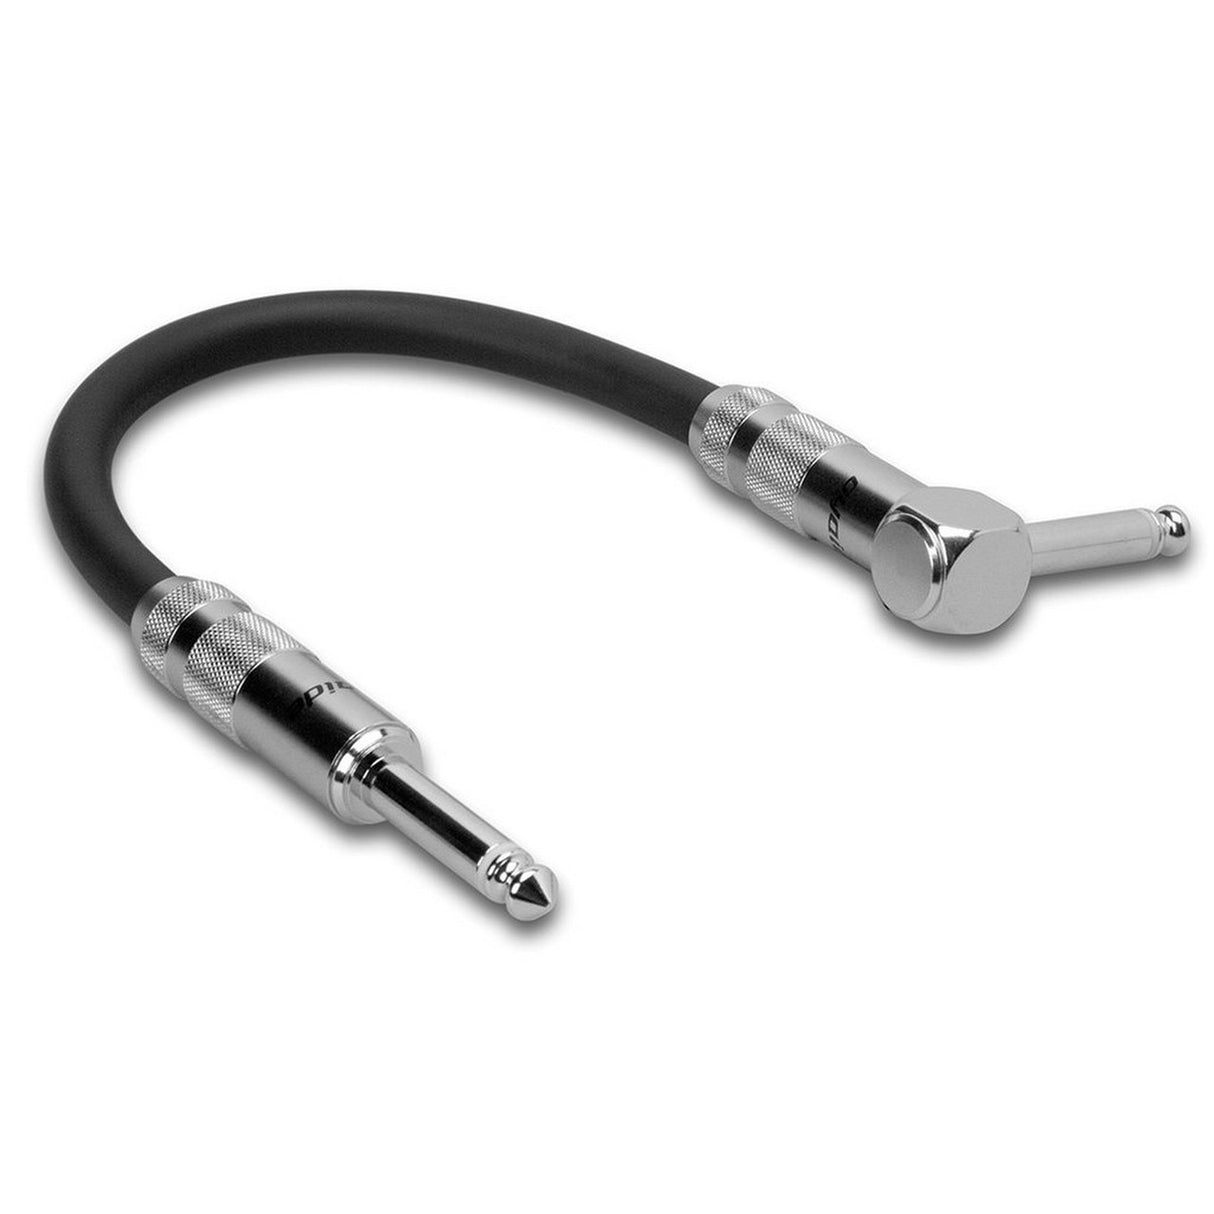 Zaolla ZGT-000.5R | 6 Inch Guitar Patch Cable Oyaide Straight to Right-Angle Cable